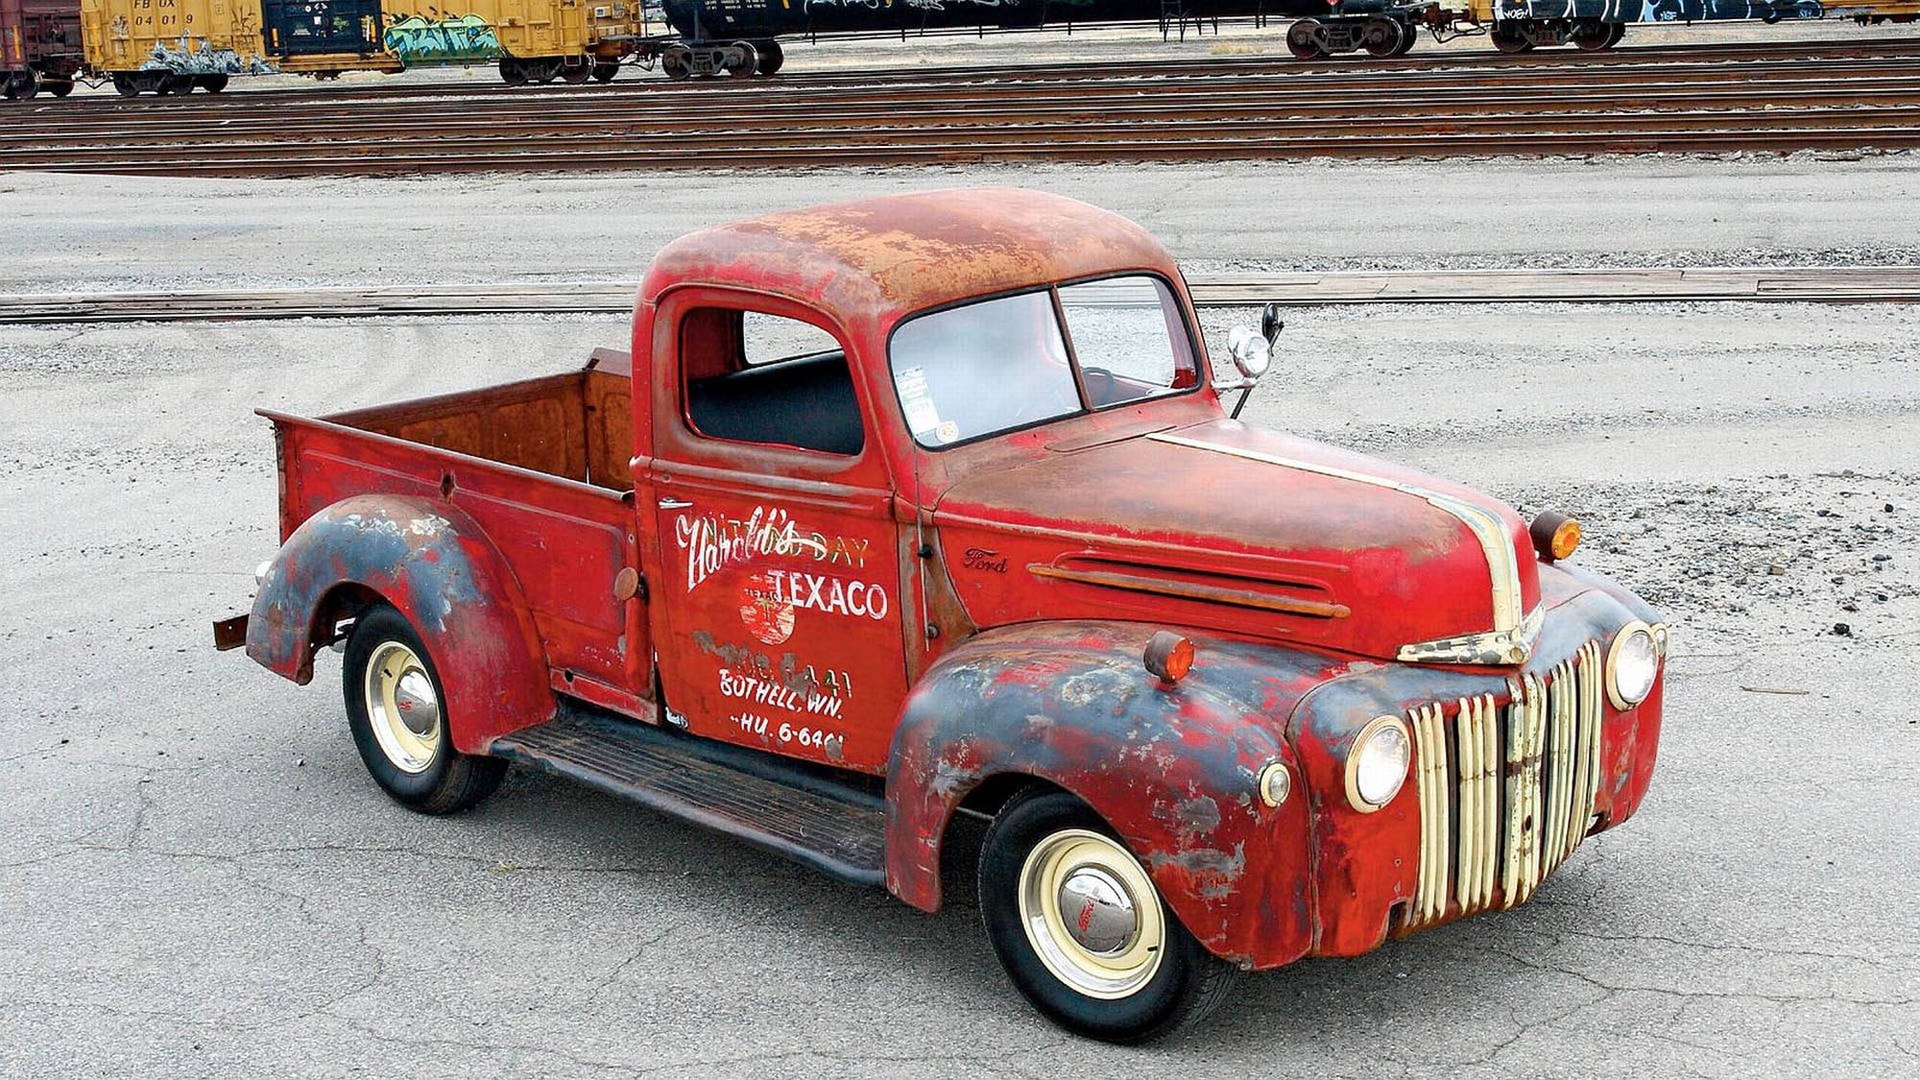 Vintage Beauty In Rust - 1947 Ford Truck